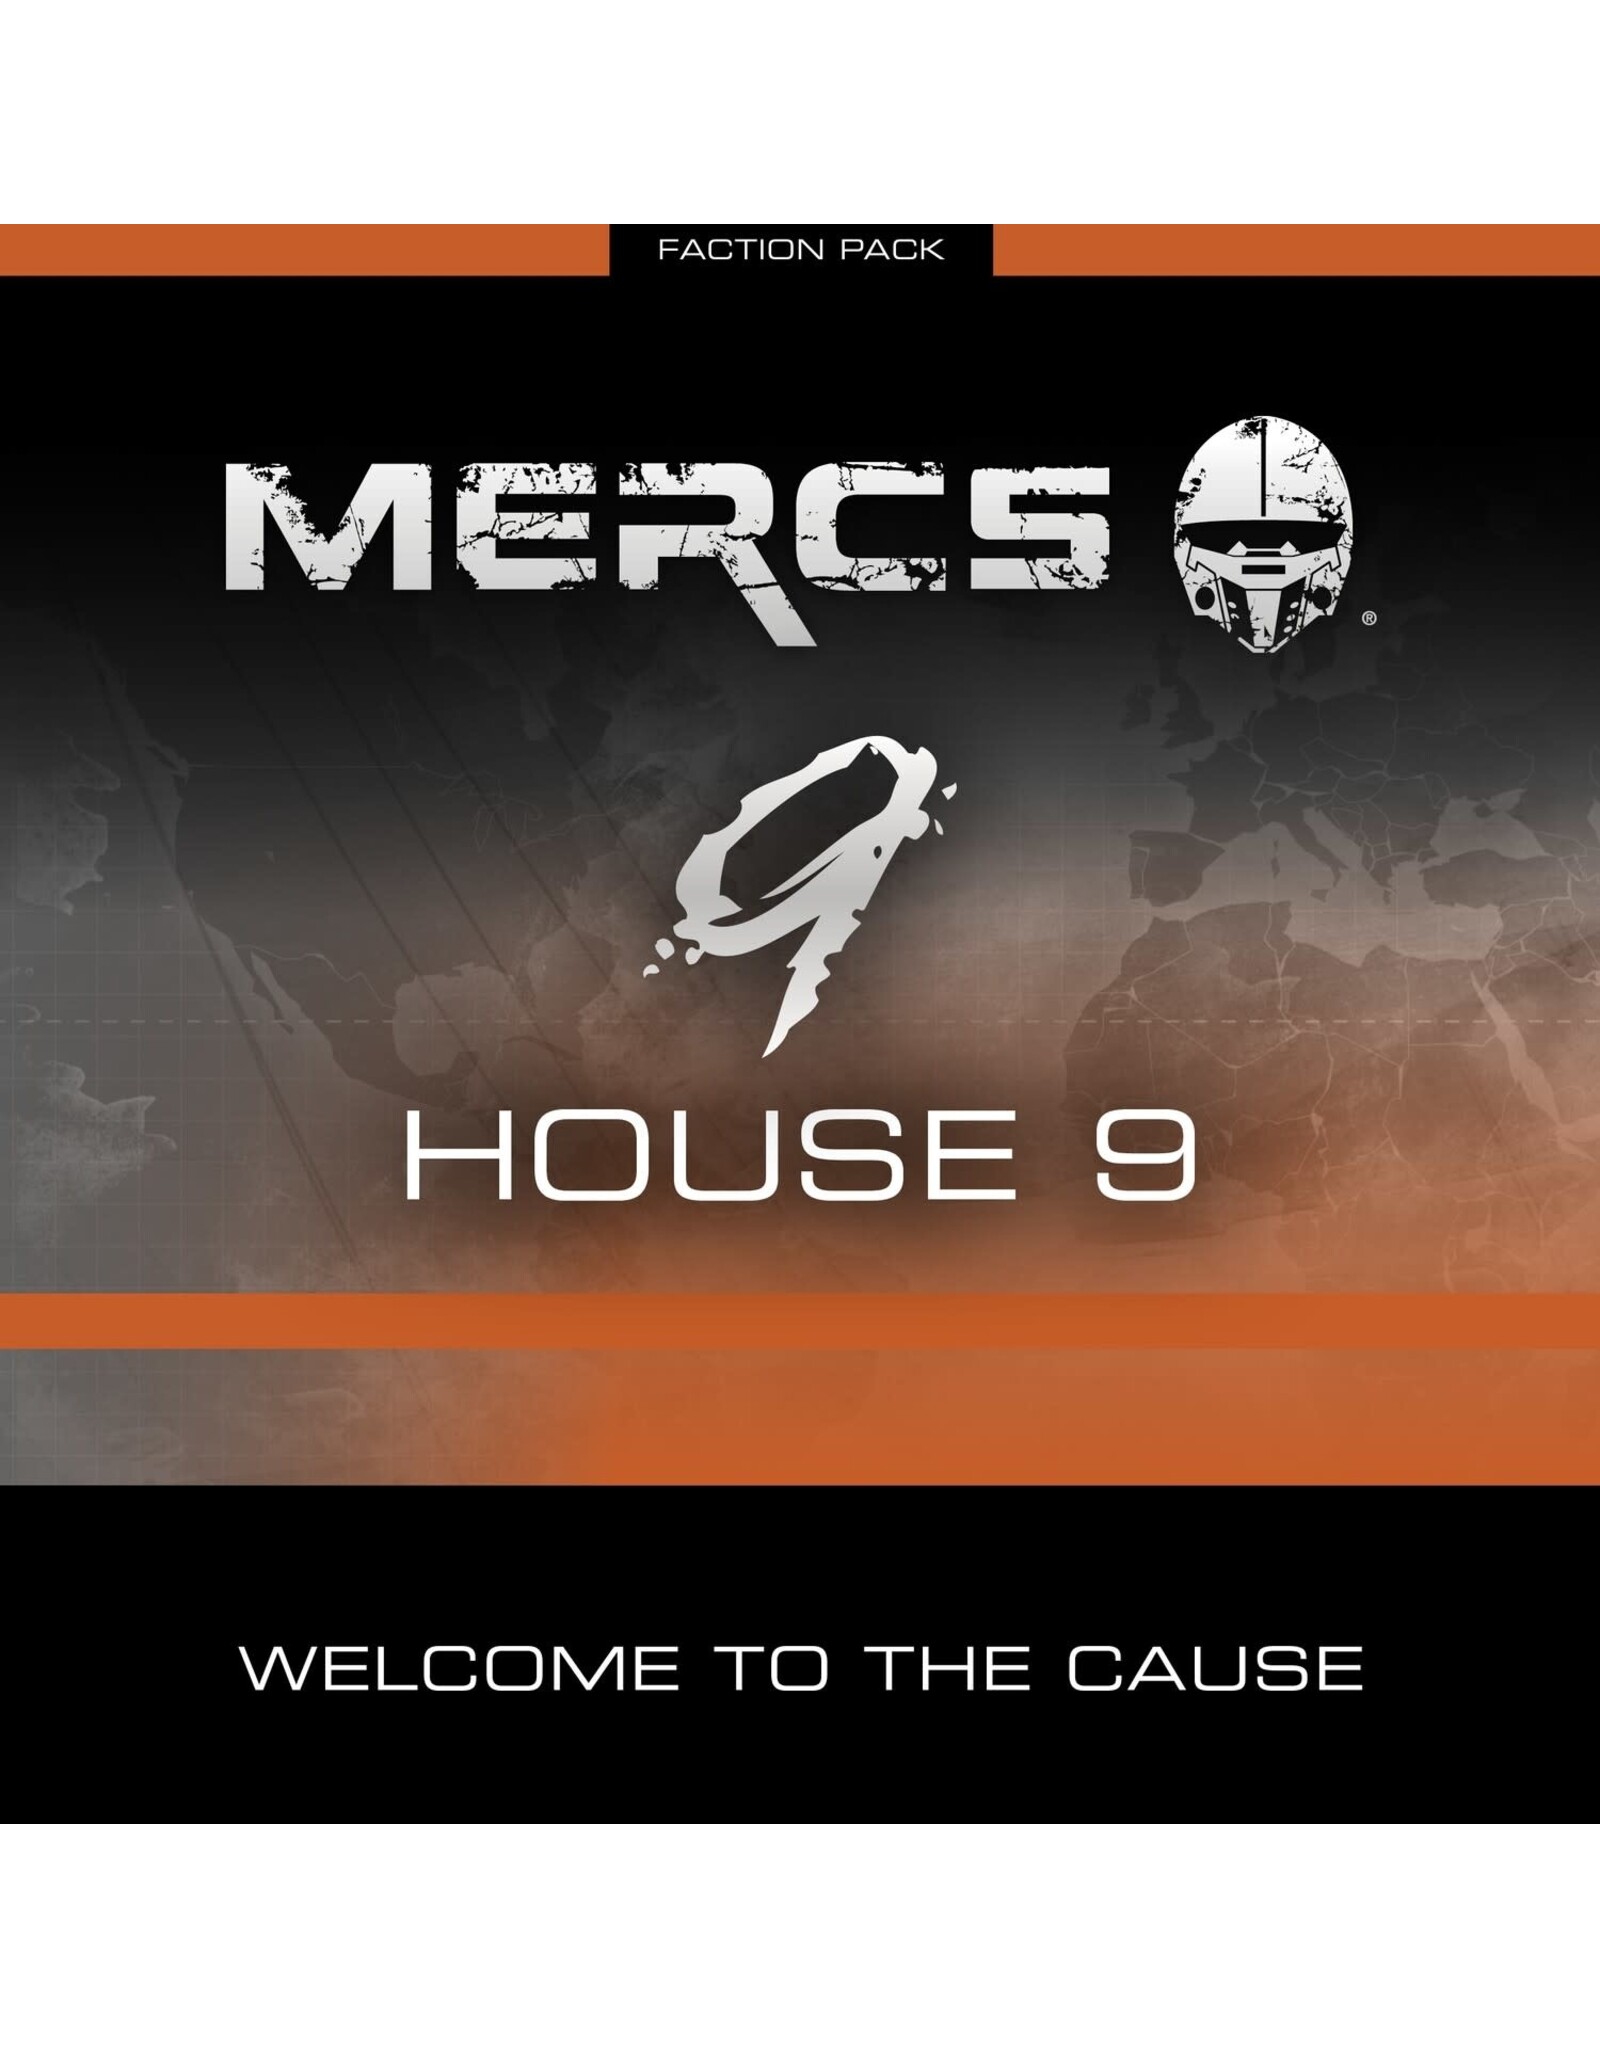 Fifth Angel Studios House 9 Faction Pack #2